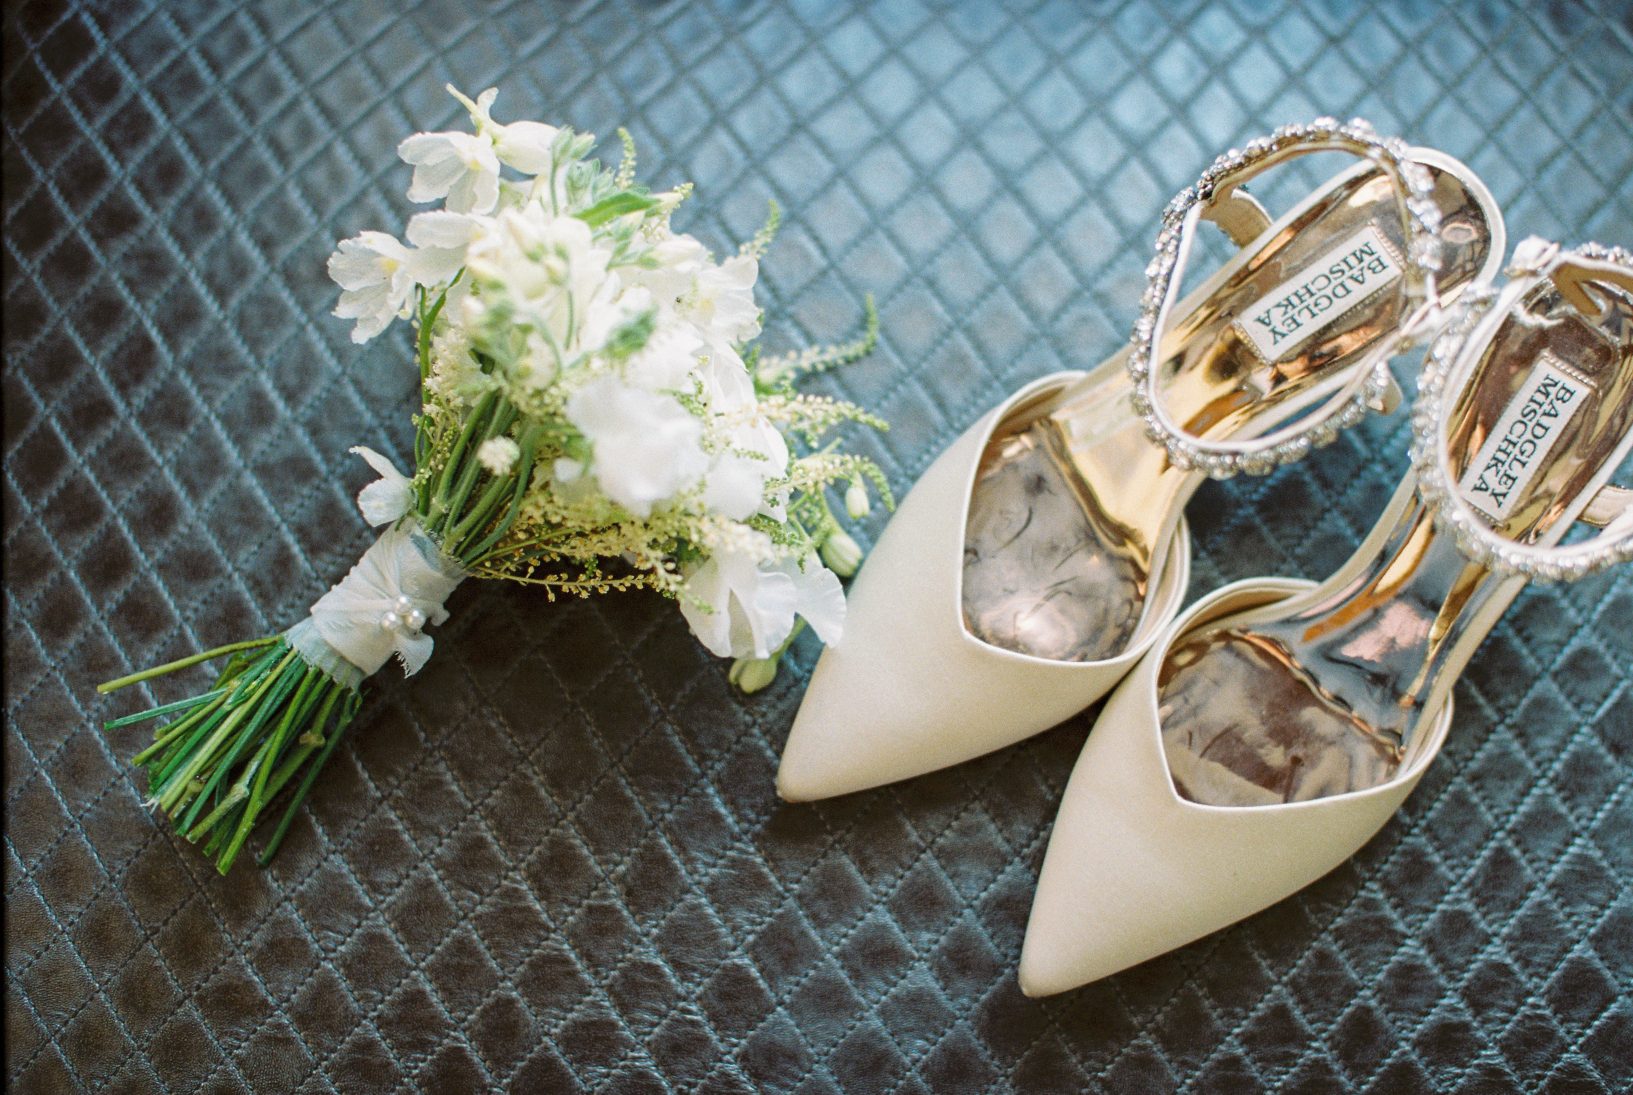 A detail shot of the bride's trendy white posy bouquet and her designer shoes